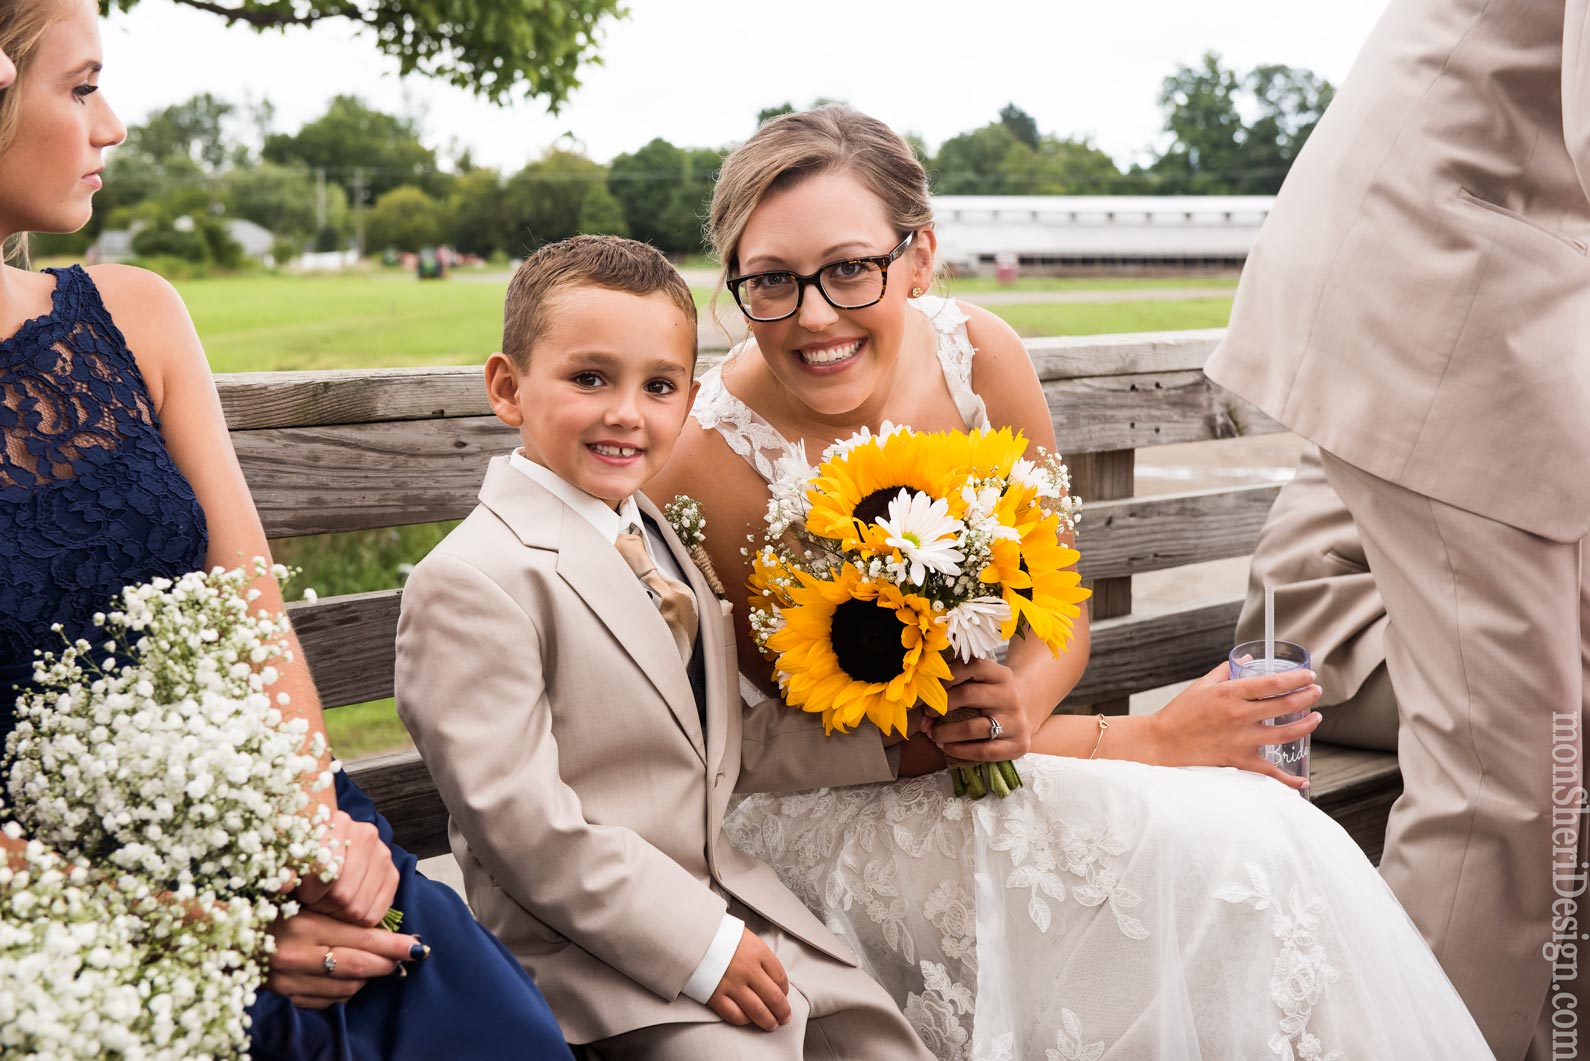 Event Photography - Grand Rapids, MI-HITCHING POST EVENTS: wedding & event venue